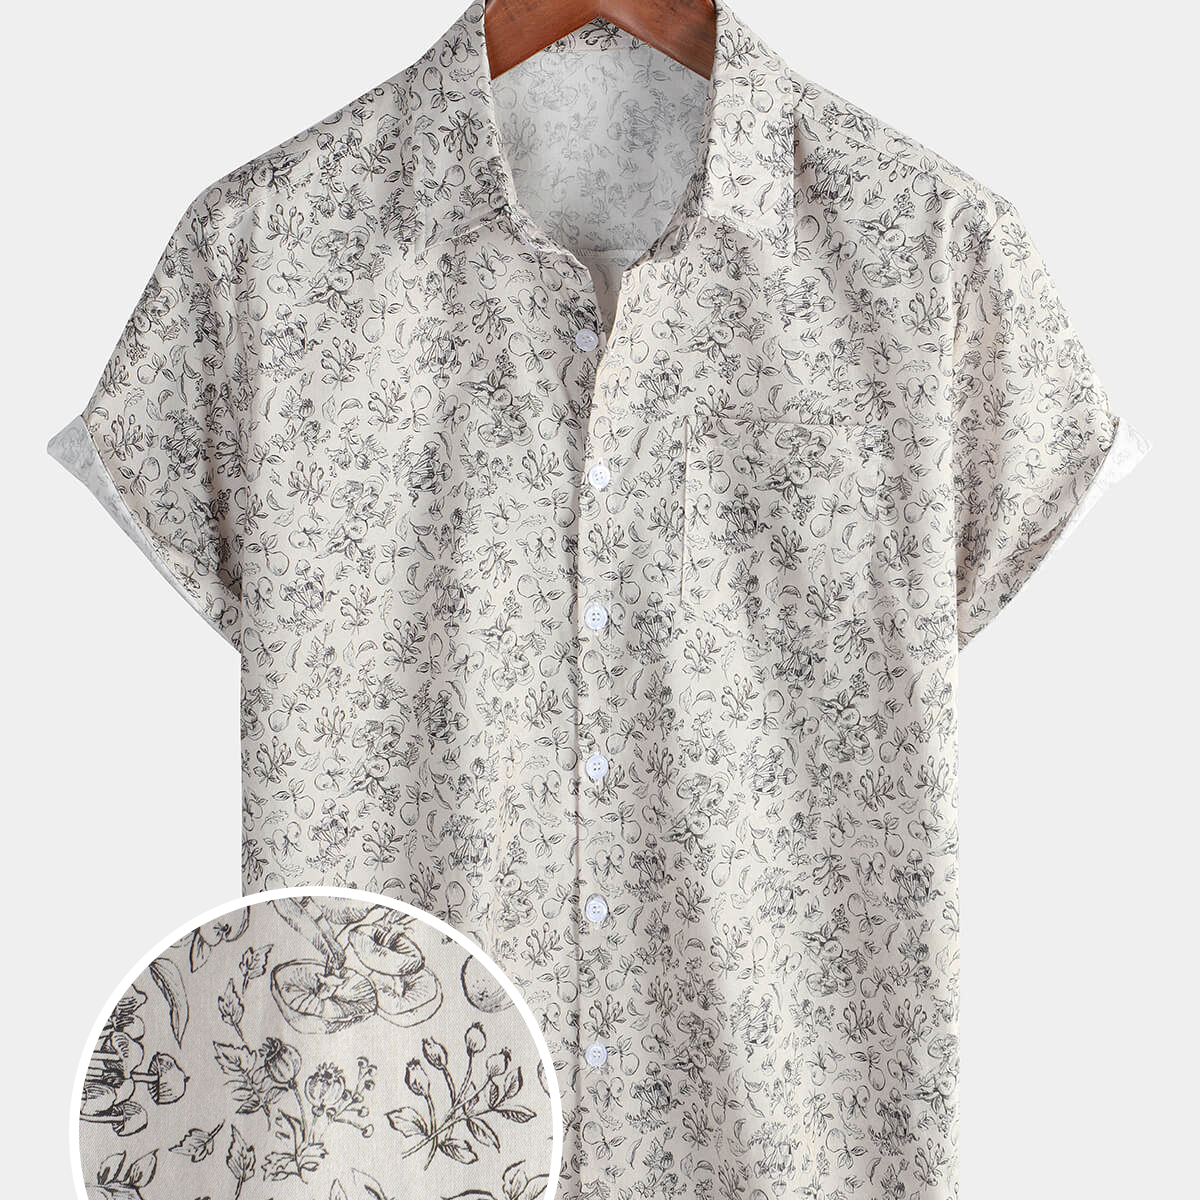 Men's Casual Floral Holiday Pocket Breathable Cotton Short Sleeve Button Up Shirt